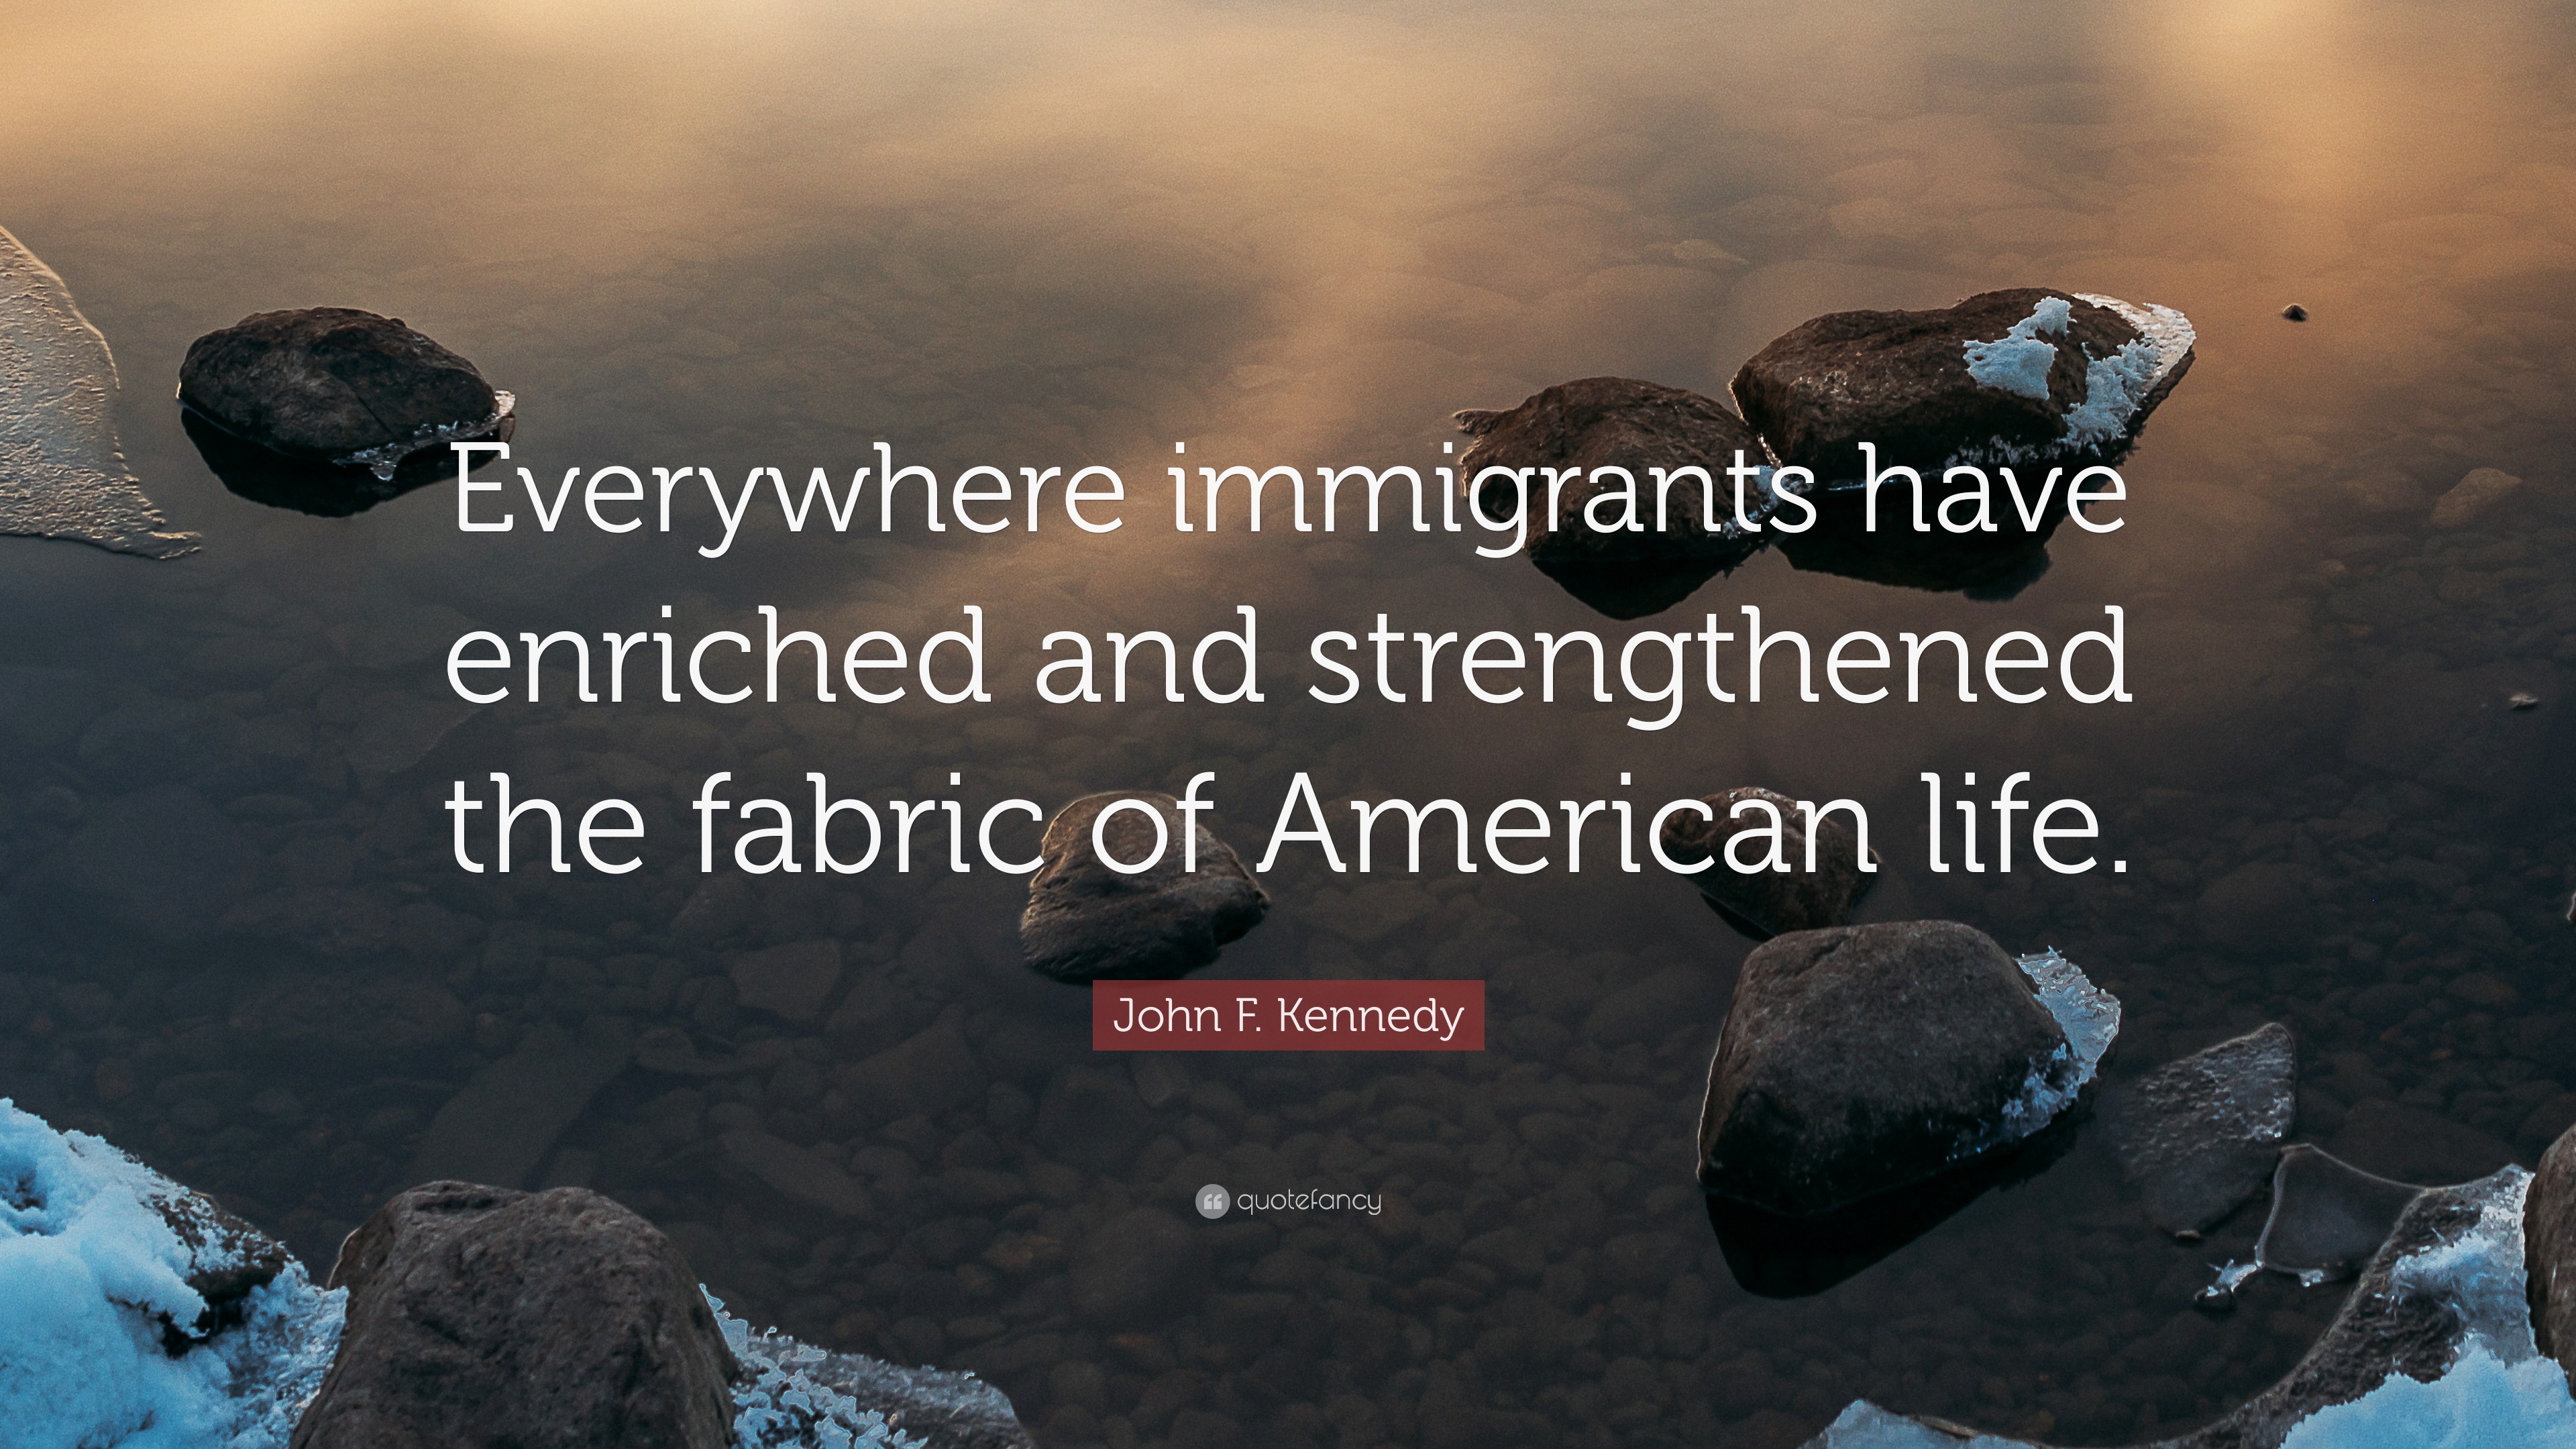 John F. Kennedy Quote: “Everywhere immigrants have enriched and